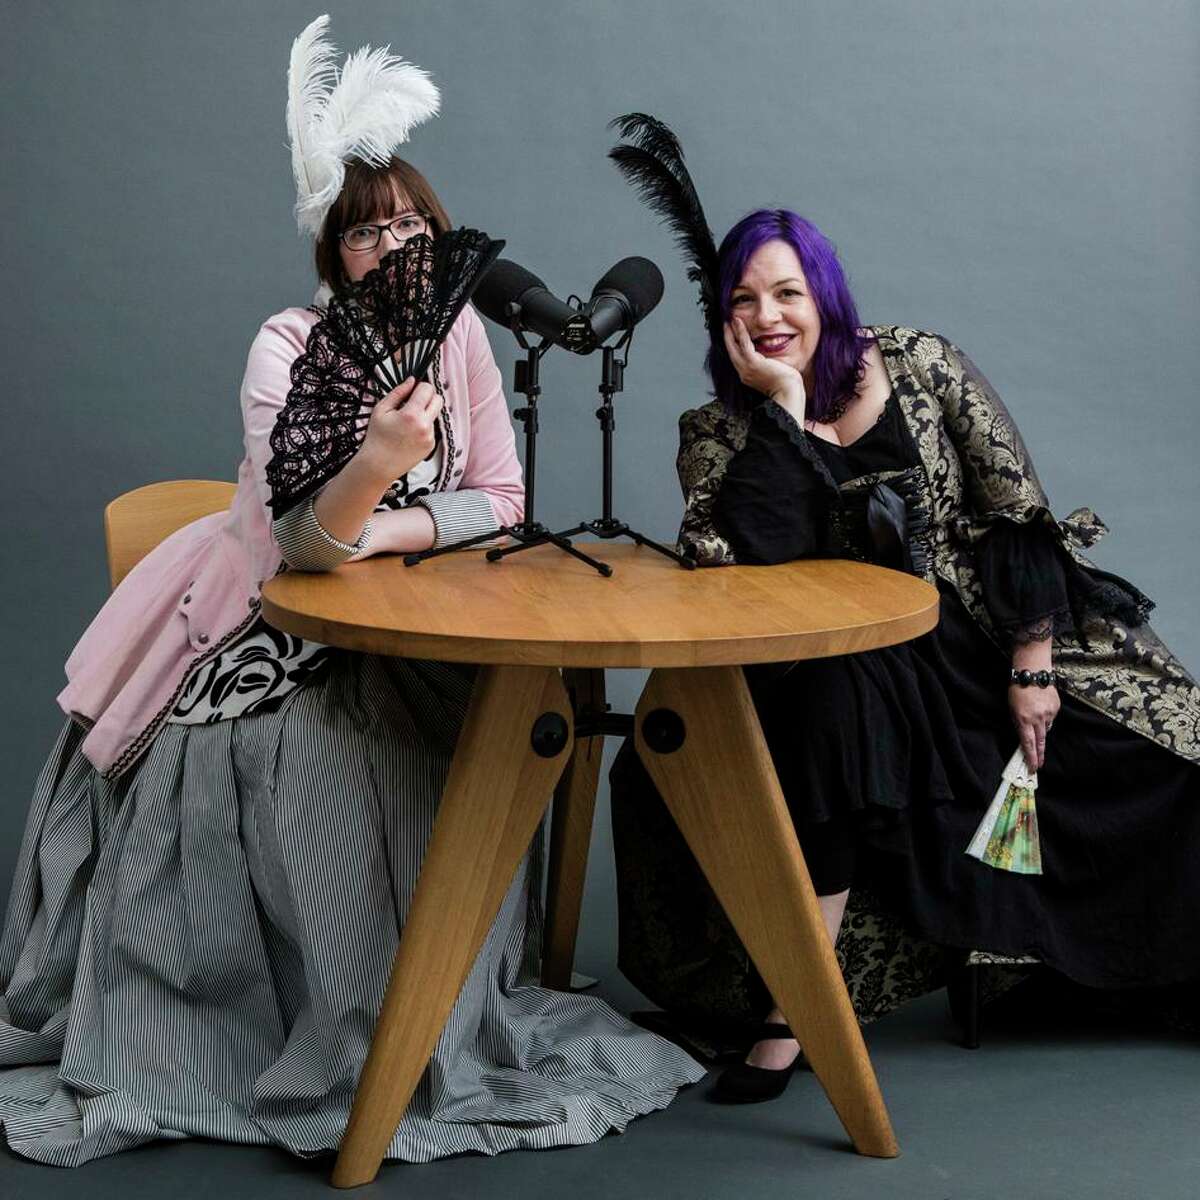 Tracy V. Wilson and Holly Frey of "Stuff You Missed in History Class" podcast